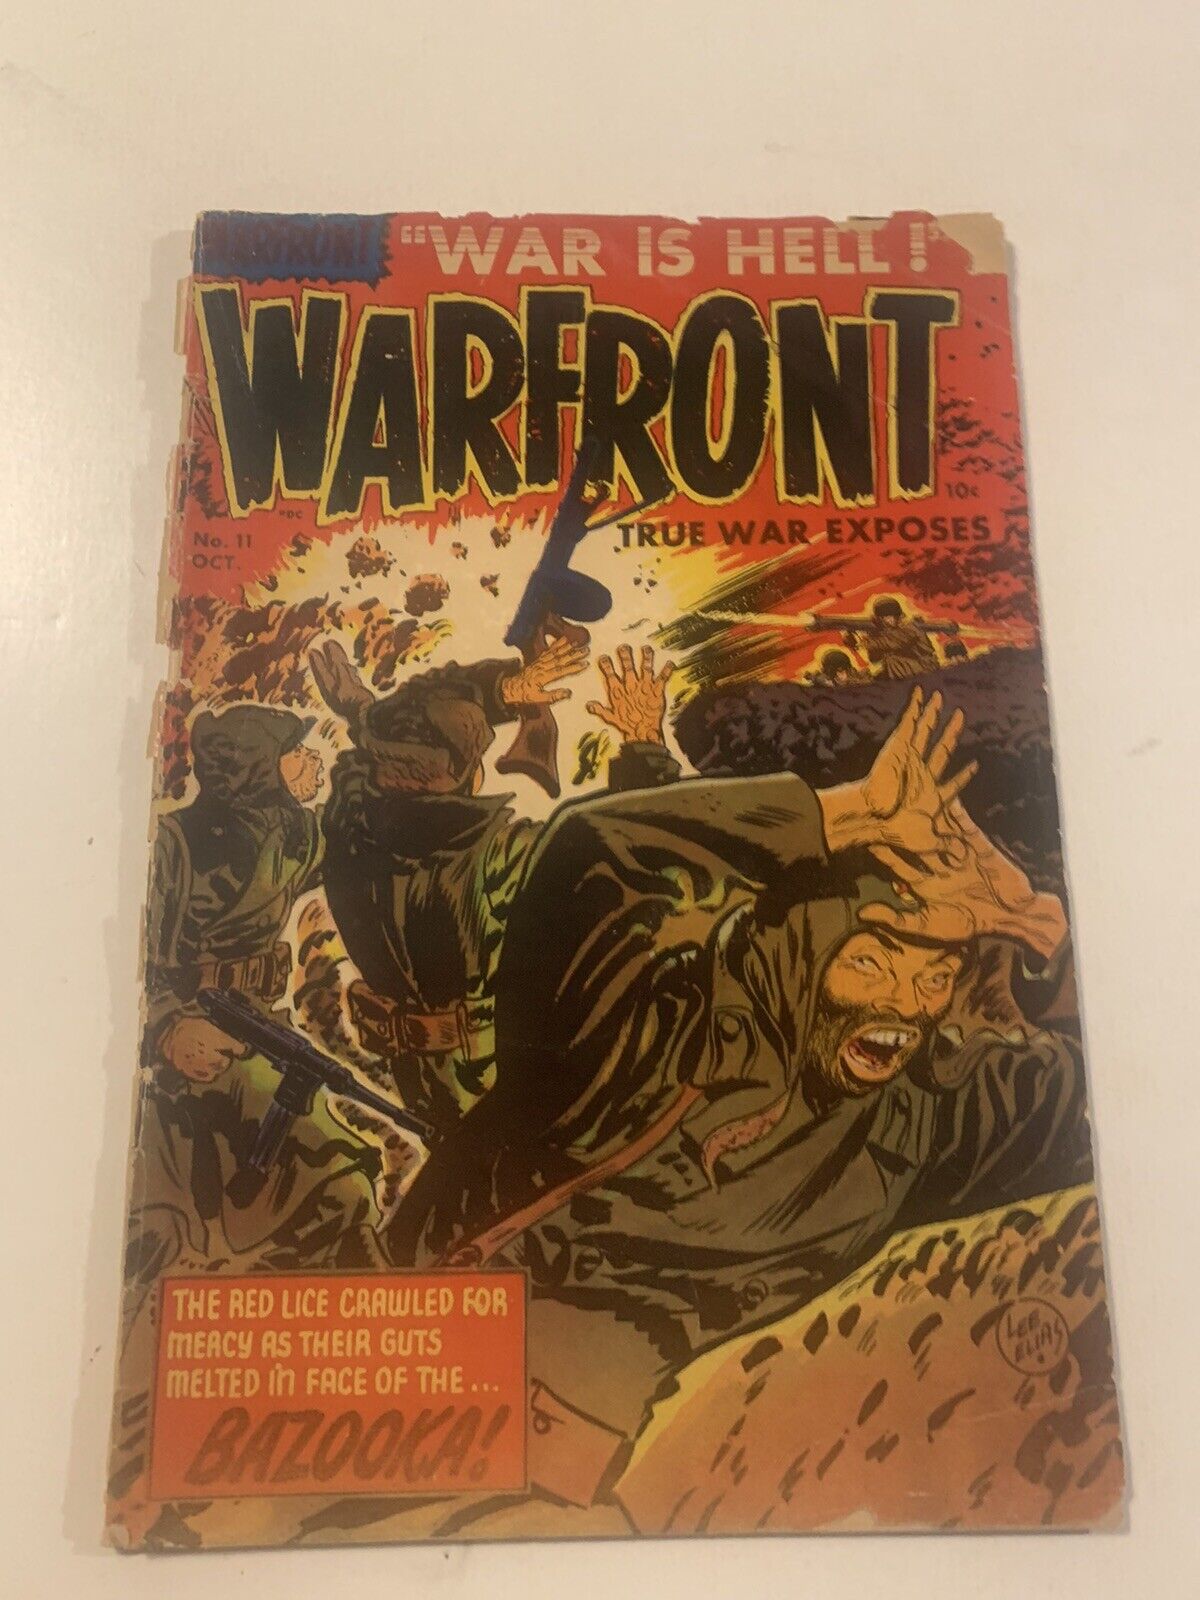 WARFRONT #11 Oct. ‘52 “War is HELL!” -Lee Elias Cover Art!